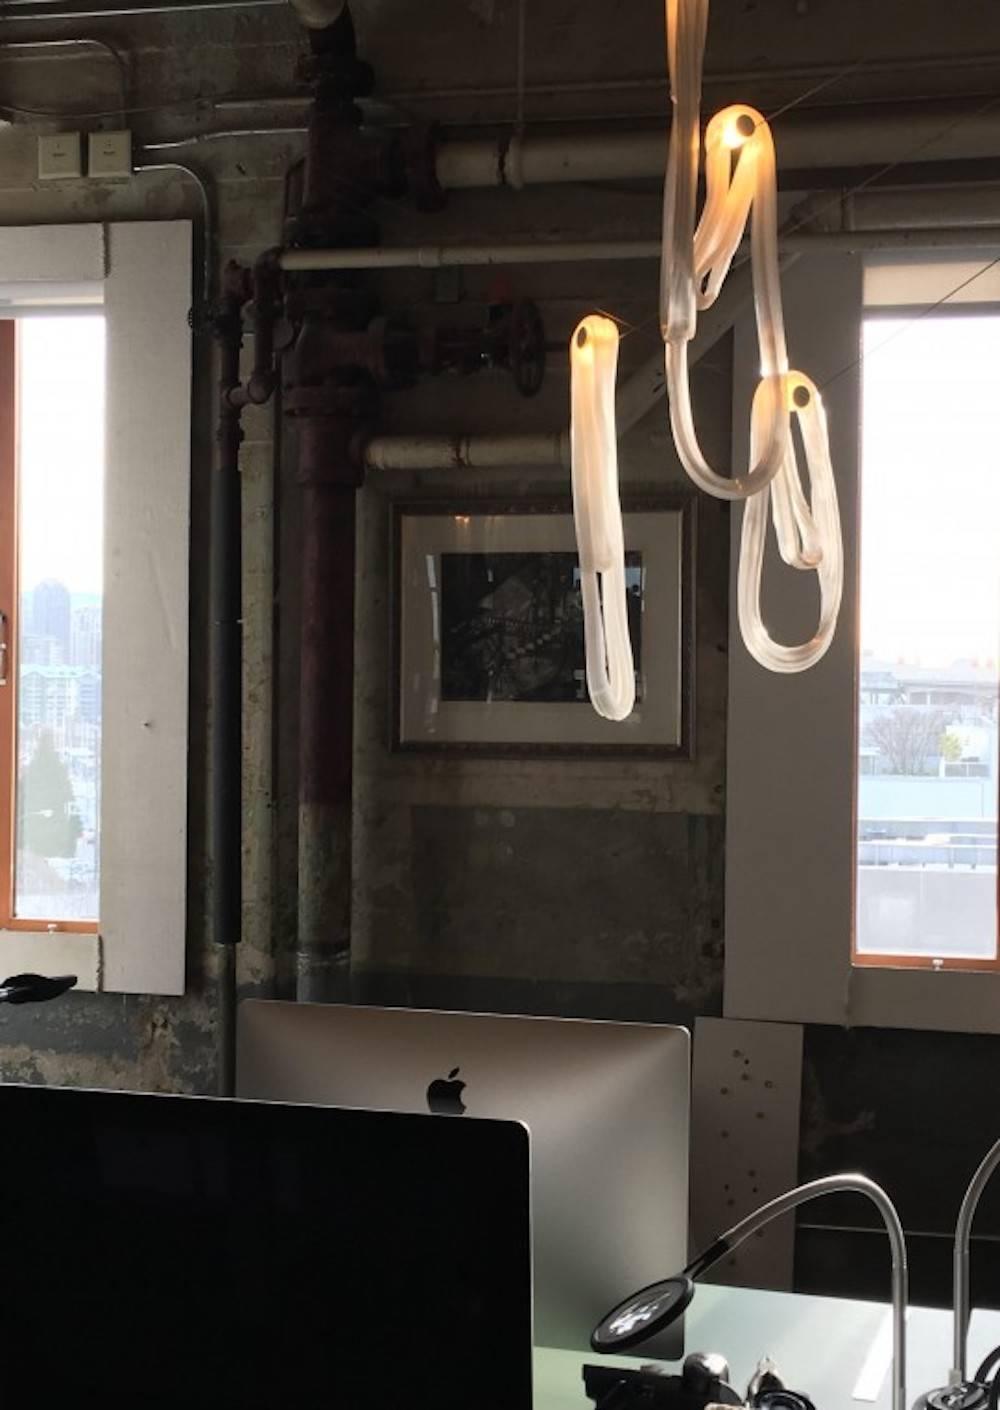 87.3 features three pendants suspended from a canopy and swag hook. Pendants can be hung from any number of optional swag points mounted on or away from the canopy.

Soda water is used to trap air in a super heated glass matrix, which is